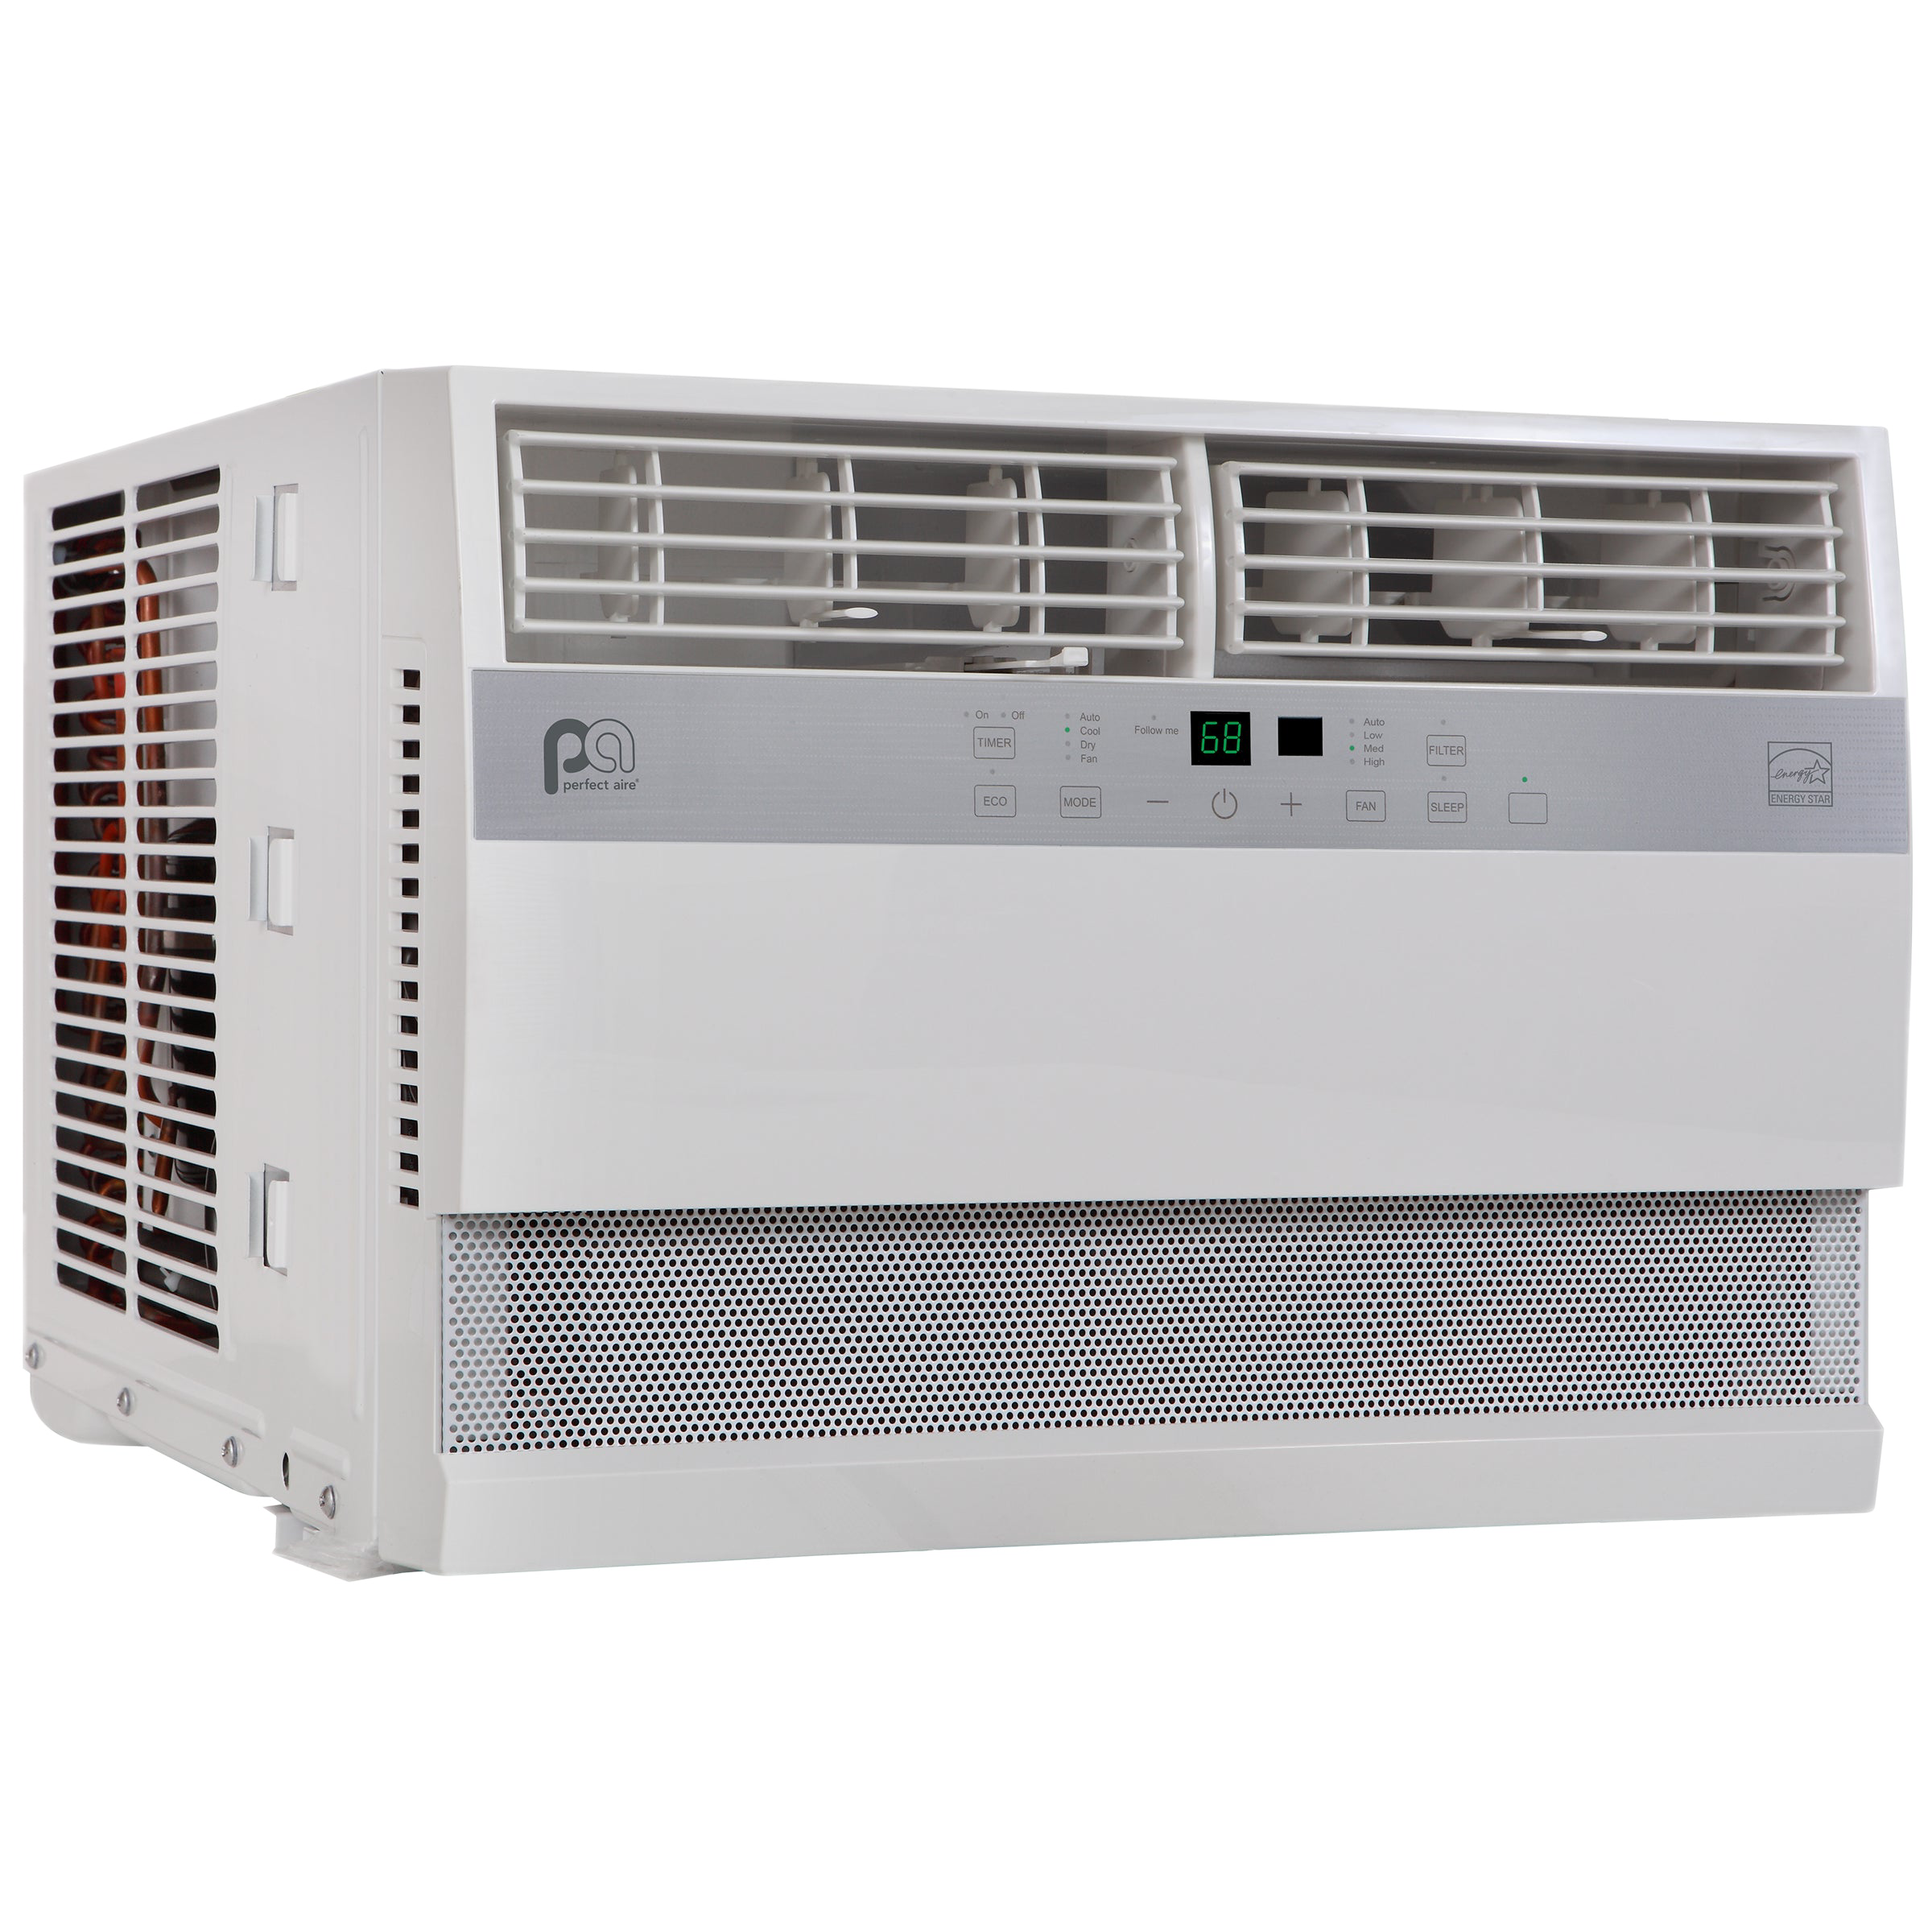 6PAC10000 Perfect Aire 10,000 BTU Flat Panel Window Room Air Conditioner, Sq. ft: 400-450 Coverage, With Remote Control